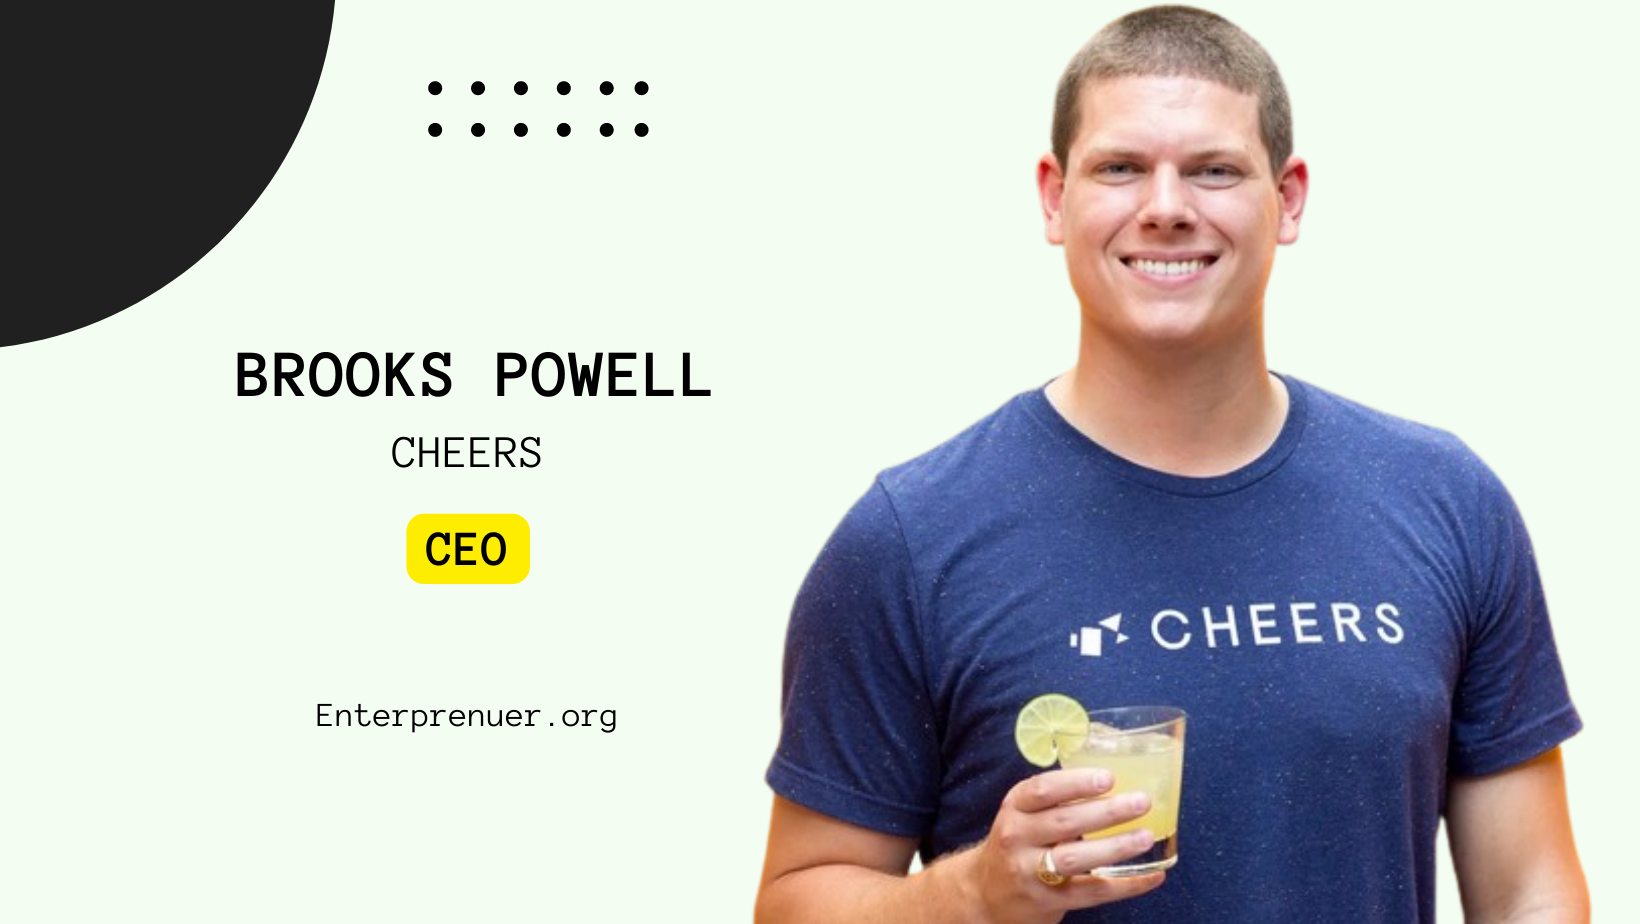 Brooks Powell CEO of Cheers